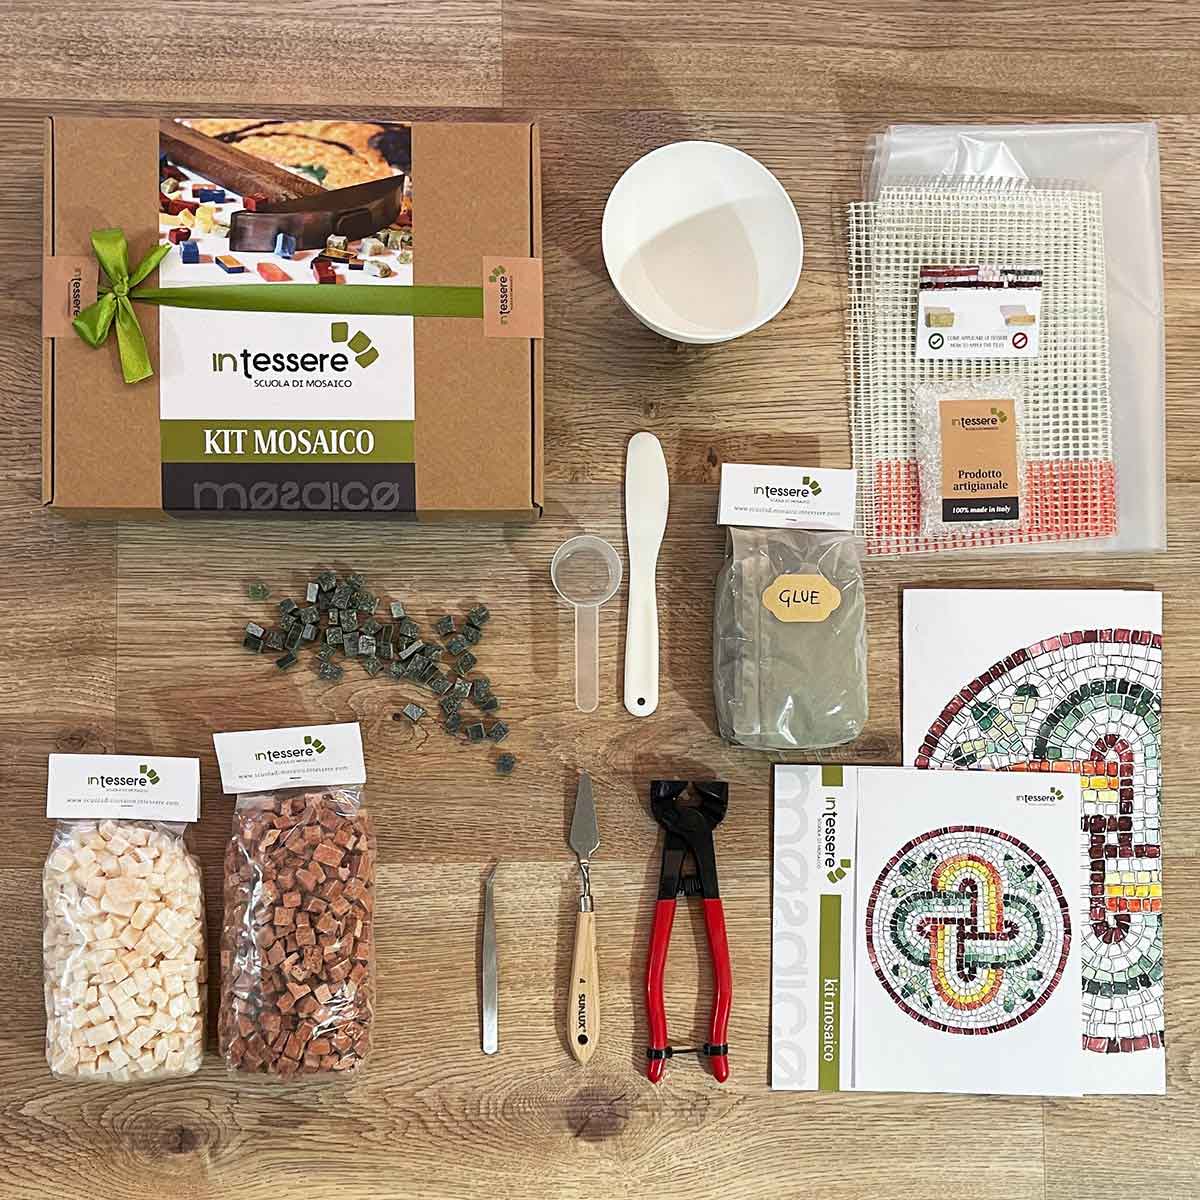 PROFESSIONAL MOSAIC COURSE (video lessons + 8 mosaic kits)